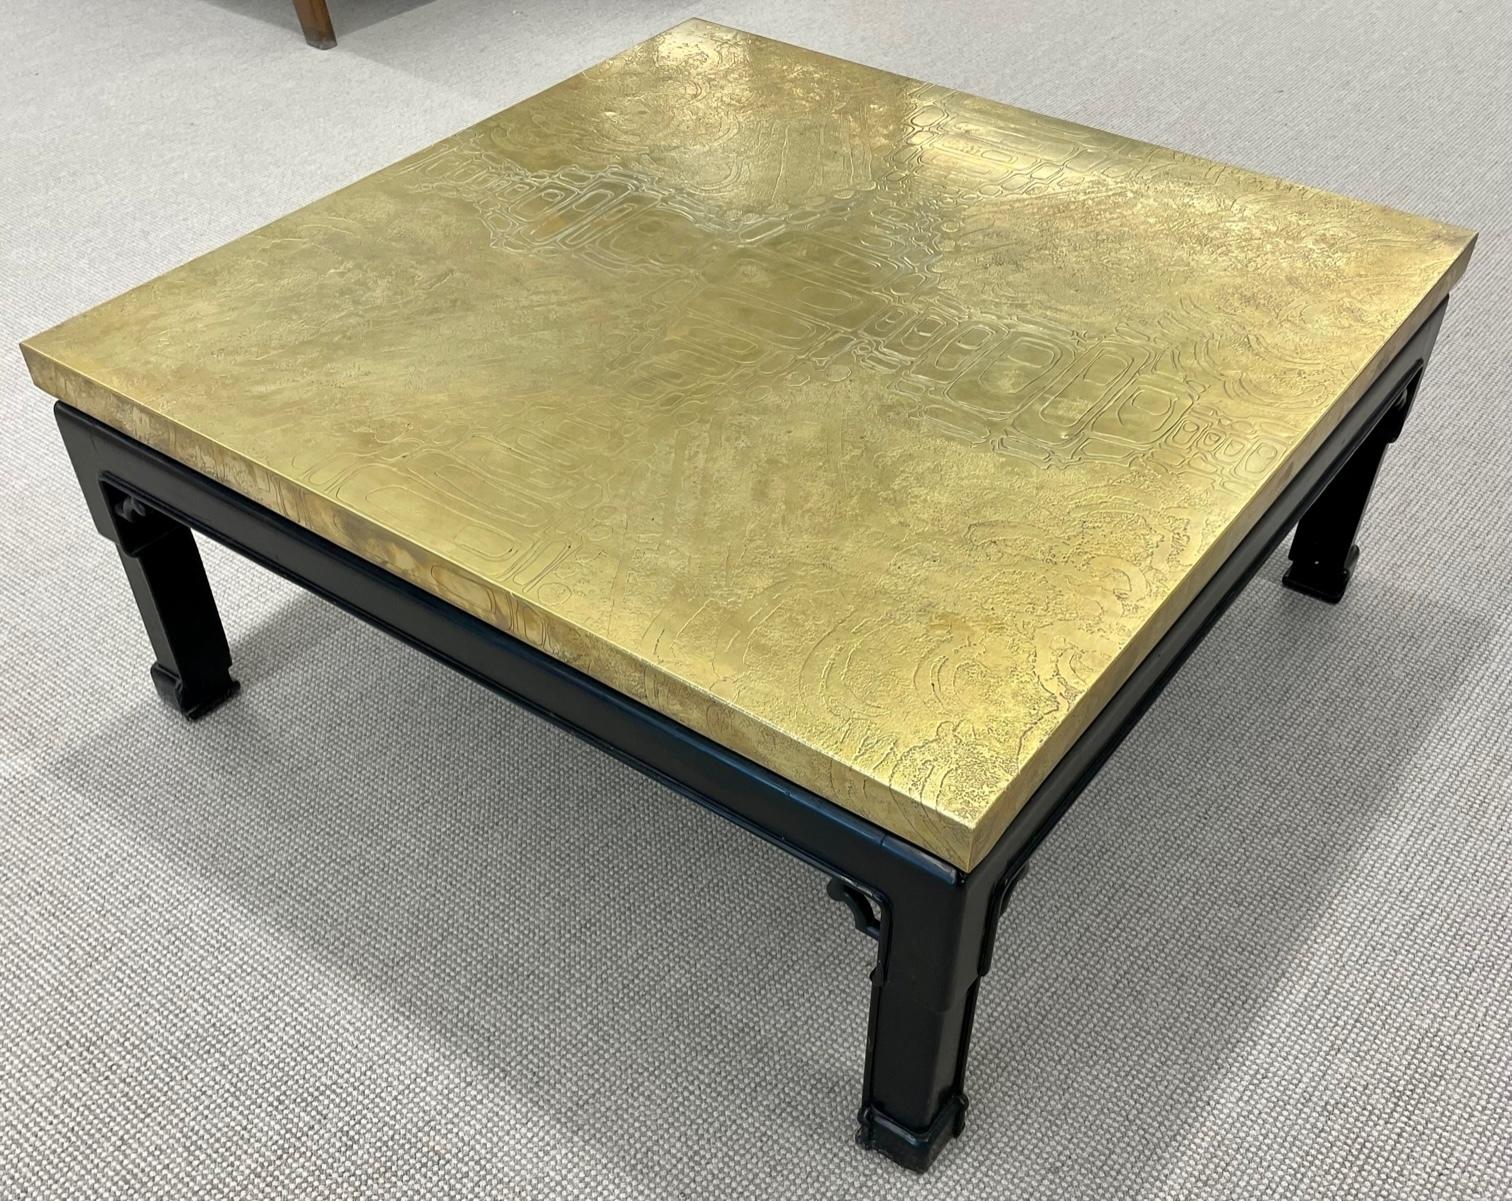 Mid-Century Etched Brass Coffee Table by Georges Mathias, Signed, Belgium, 1970s

Other artists of this period include Aldo Chale, Willy Ceysens, Willy Daro and Lova Creation.

Etched brass coffee table designed by Belgian designer Georges Mathias.